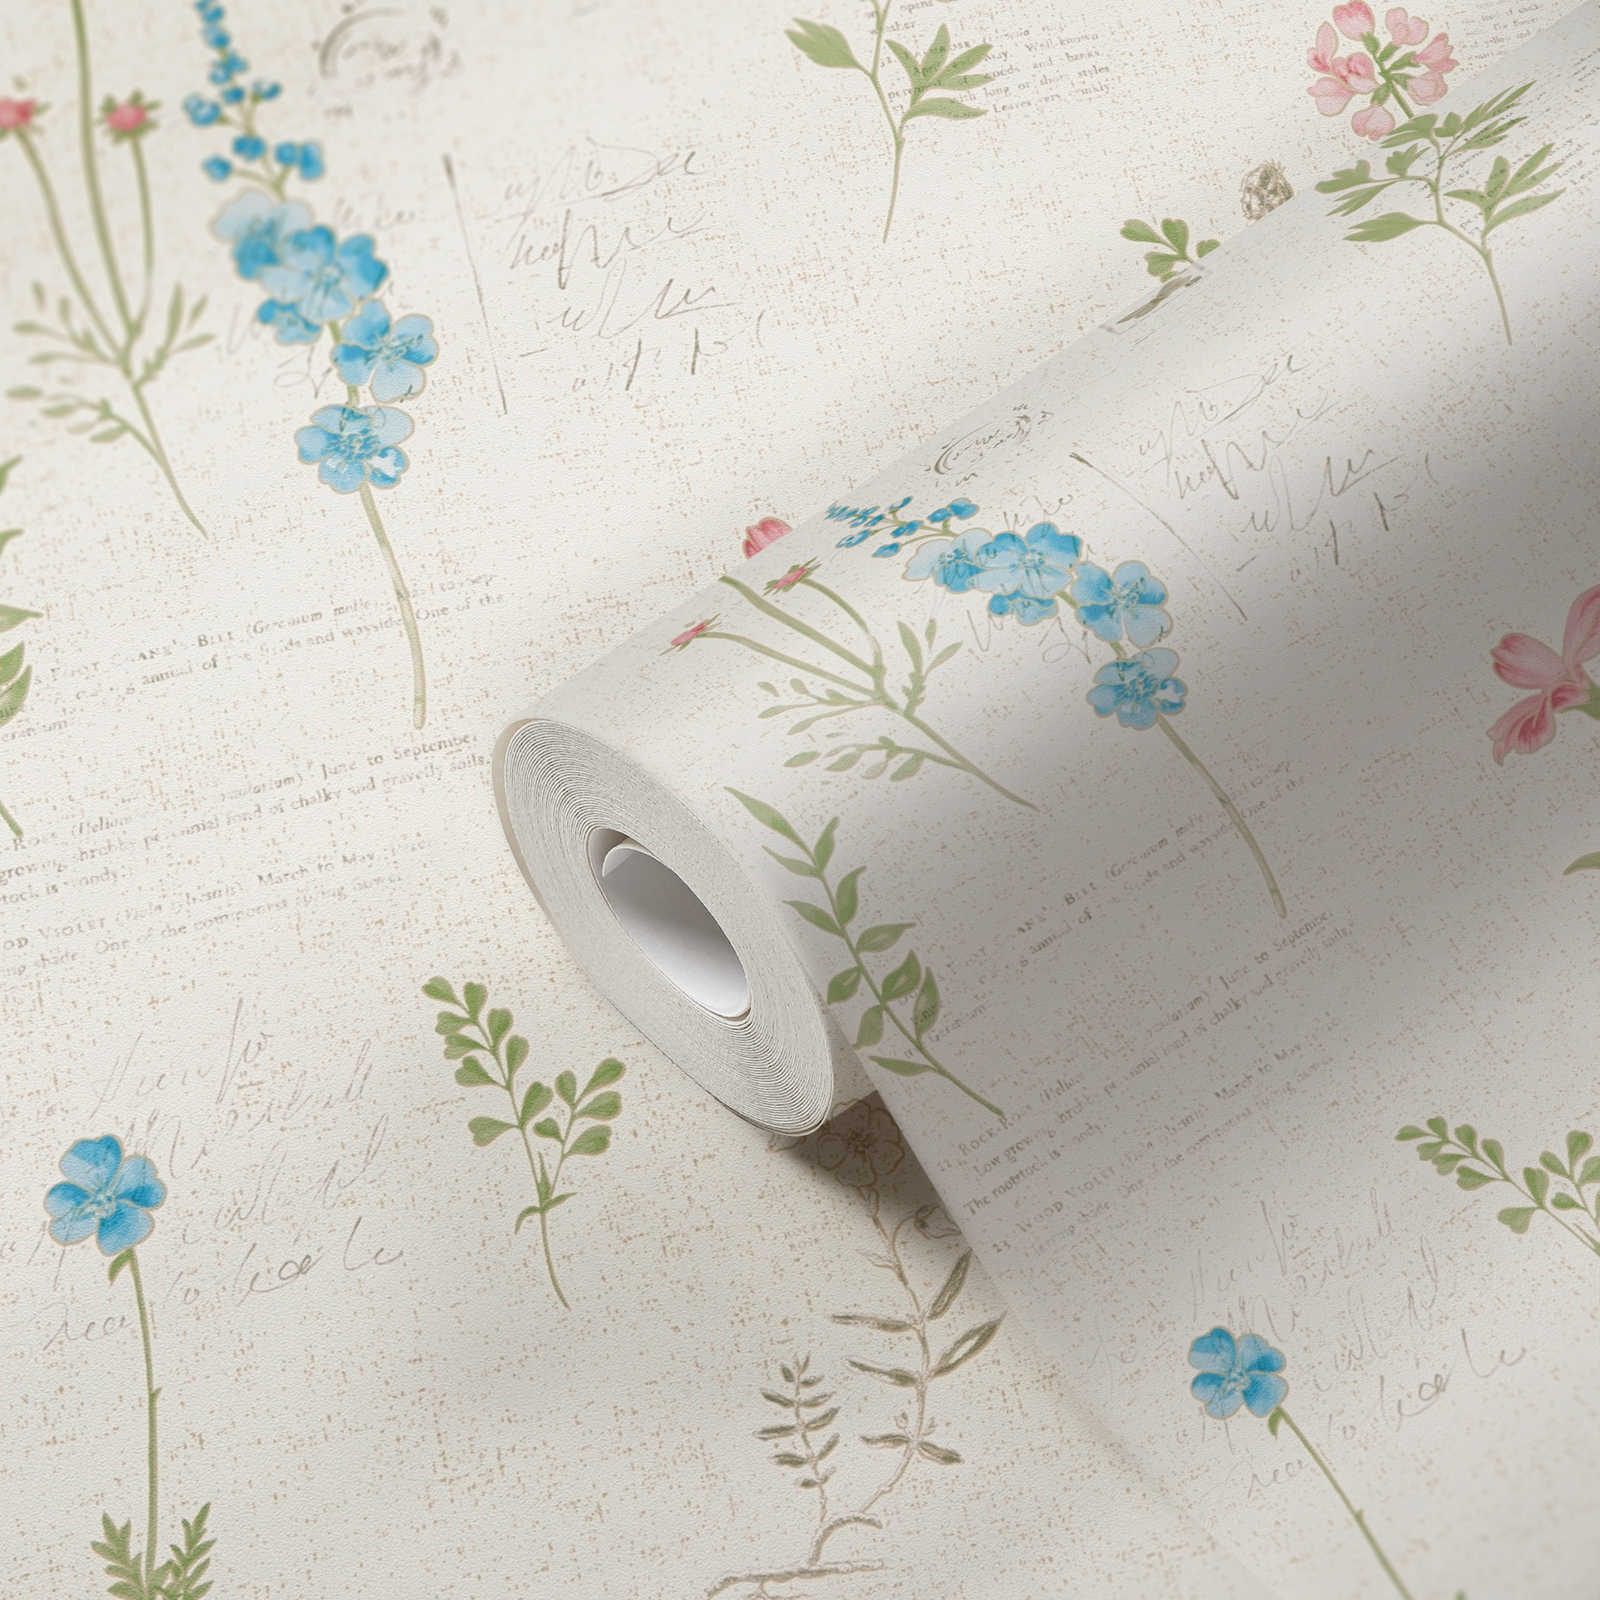             Country house wallpaper with floral pattern and used look - cream
        